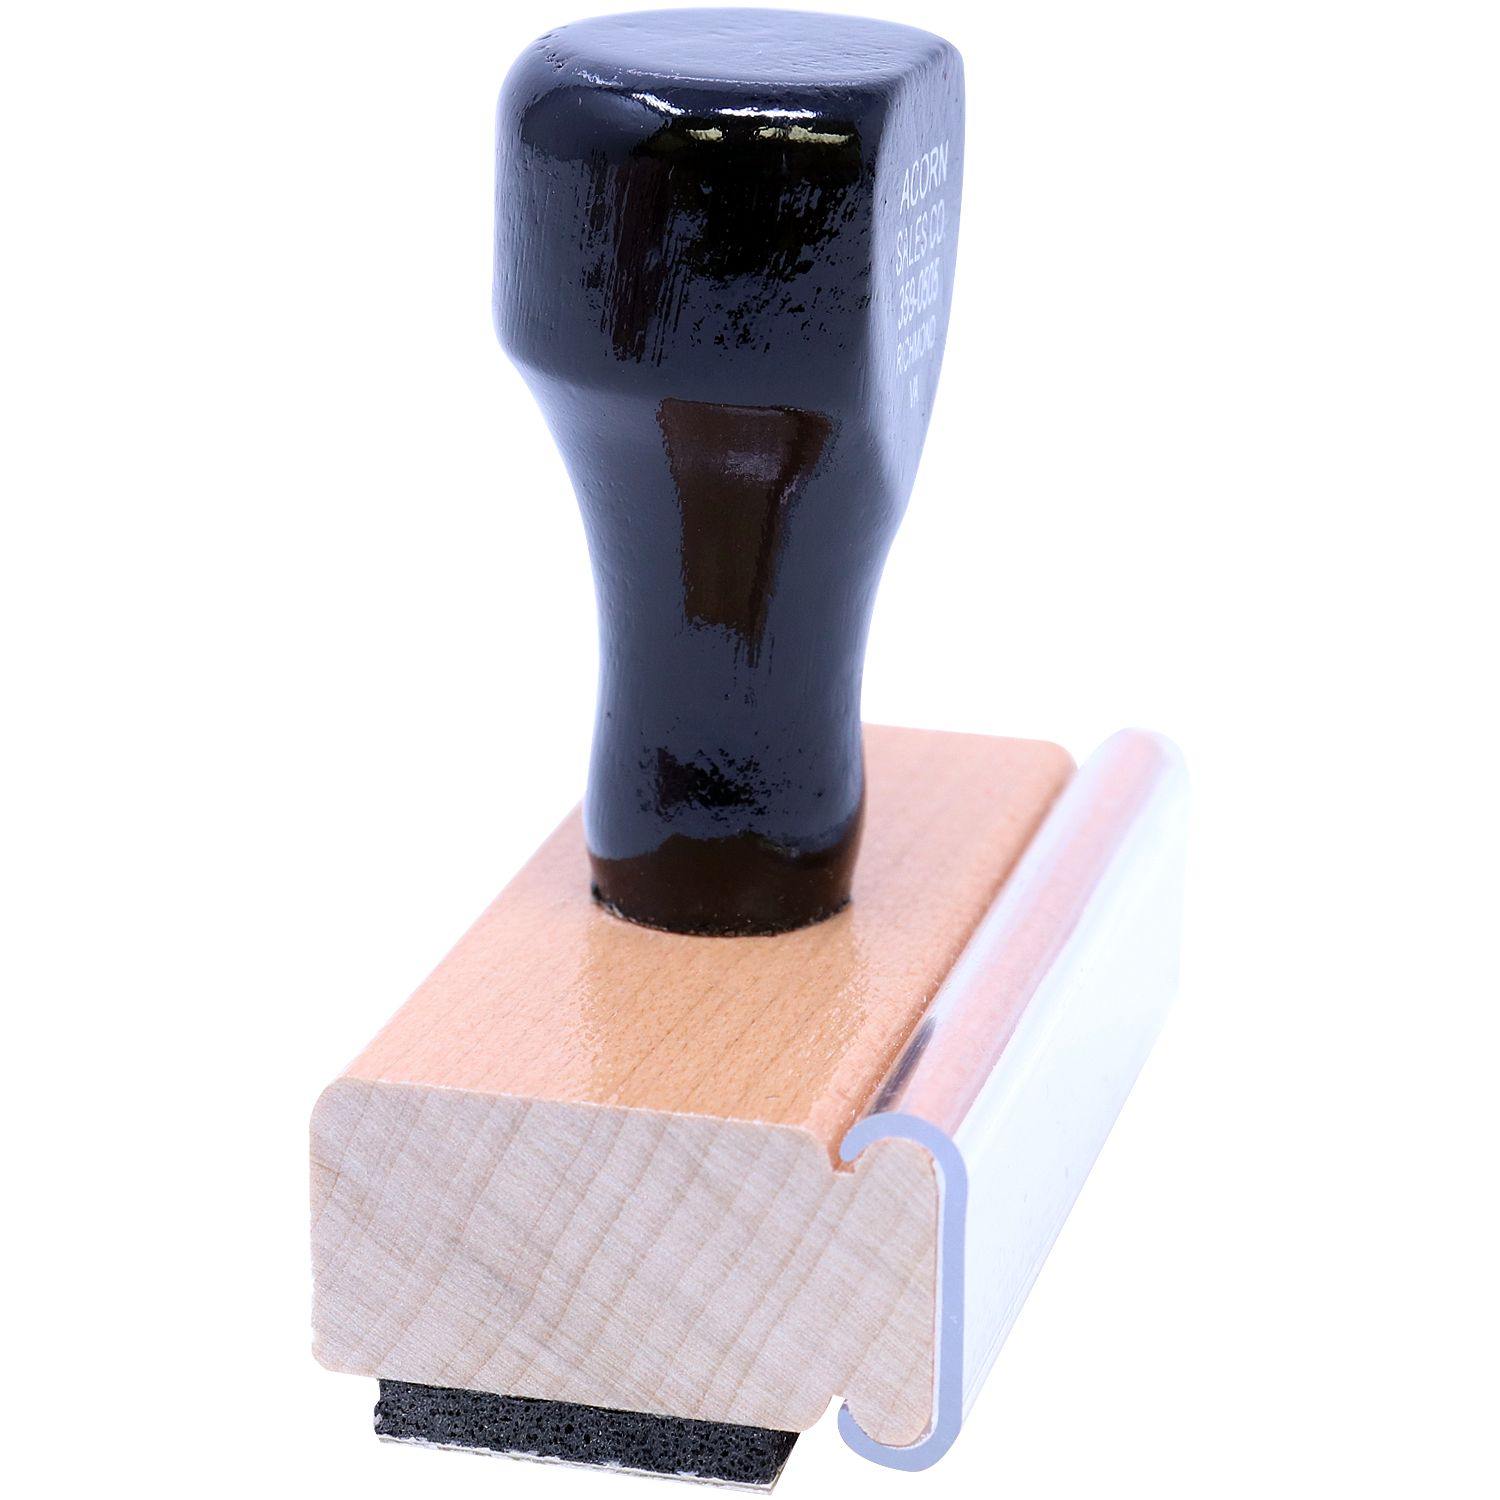 Narrow Font First Class Mail Rubber Stamp - Engineer Seal Stamps - Brand_Acorn, Impression Size_Small, Stamp Type_Regular Stamp, Type of Use_Business, Type of Use_Postal & Mailing, Type of Use_Professional